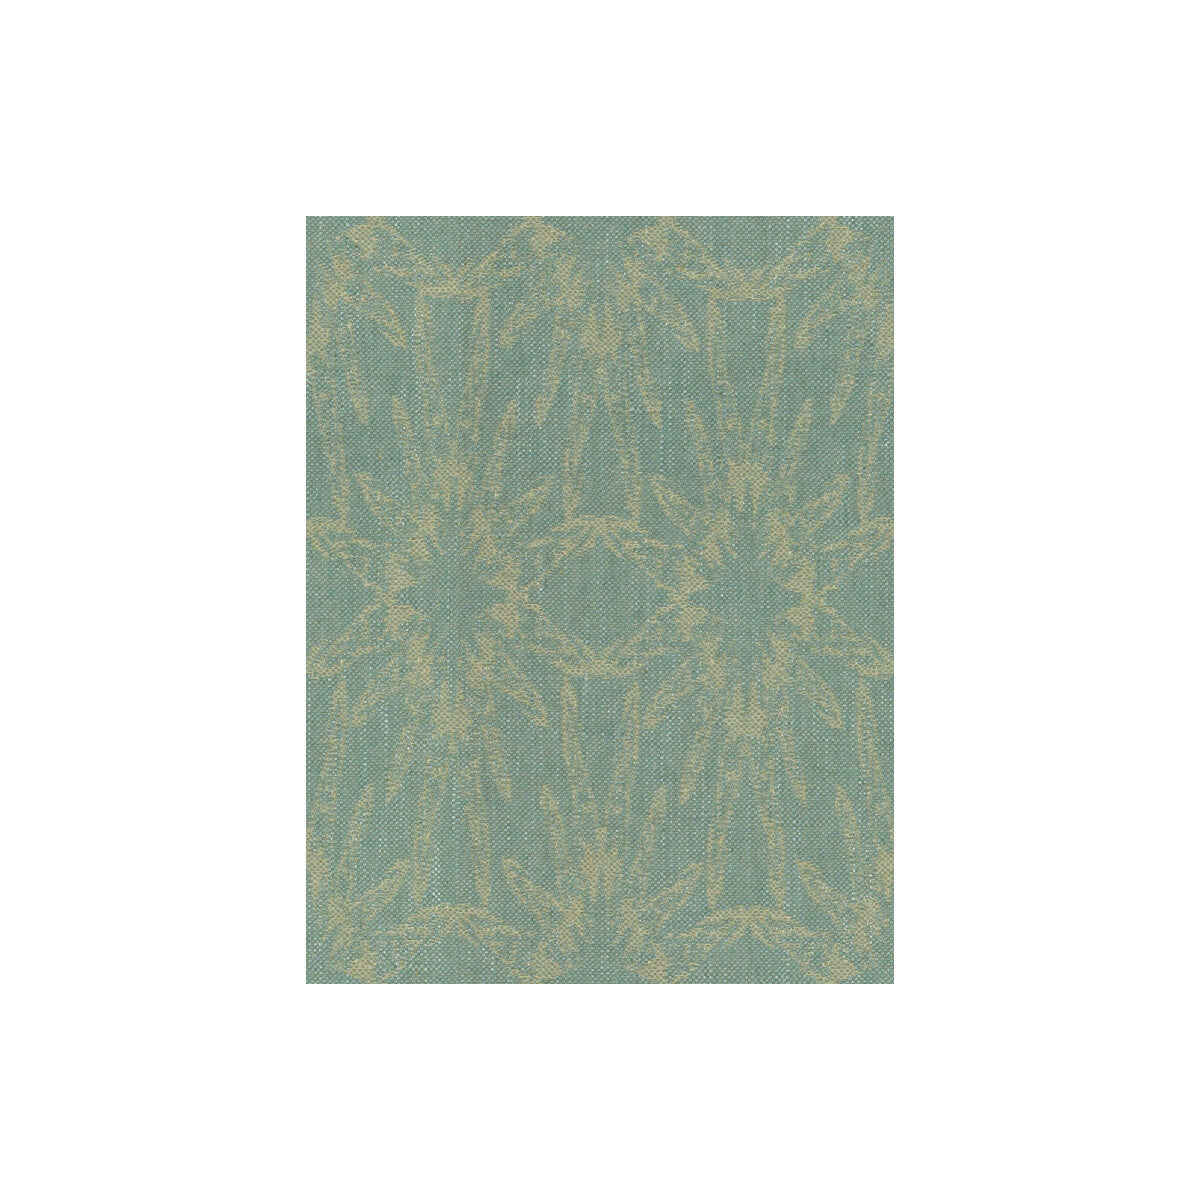 Starfish fabric in aqua color - pattern GWF-3202.13.0 - by Lee Jofa Modern in the Allegra Hicks Islands collection